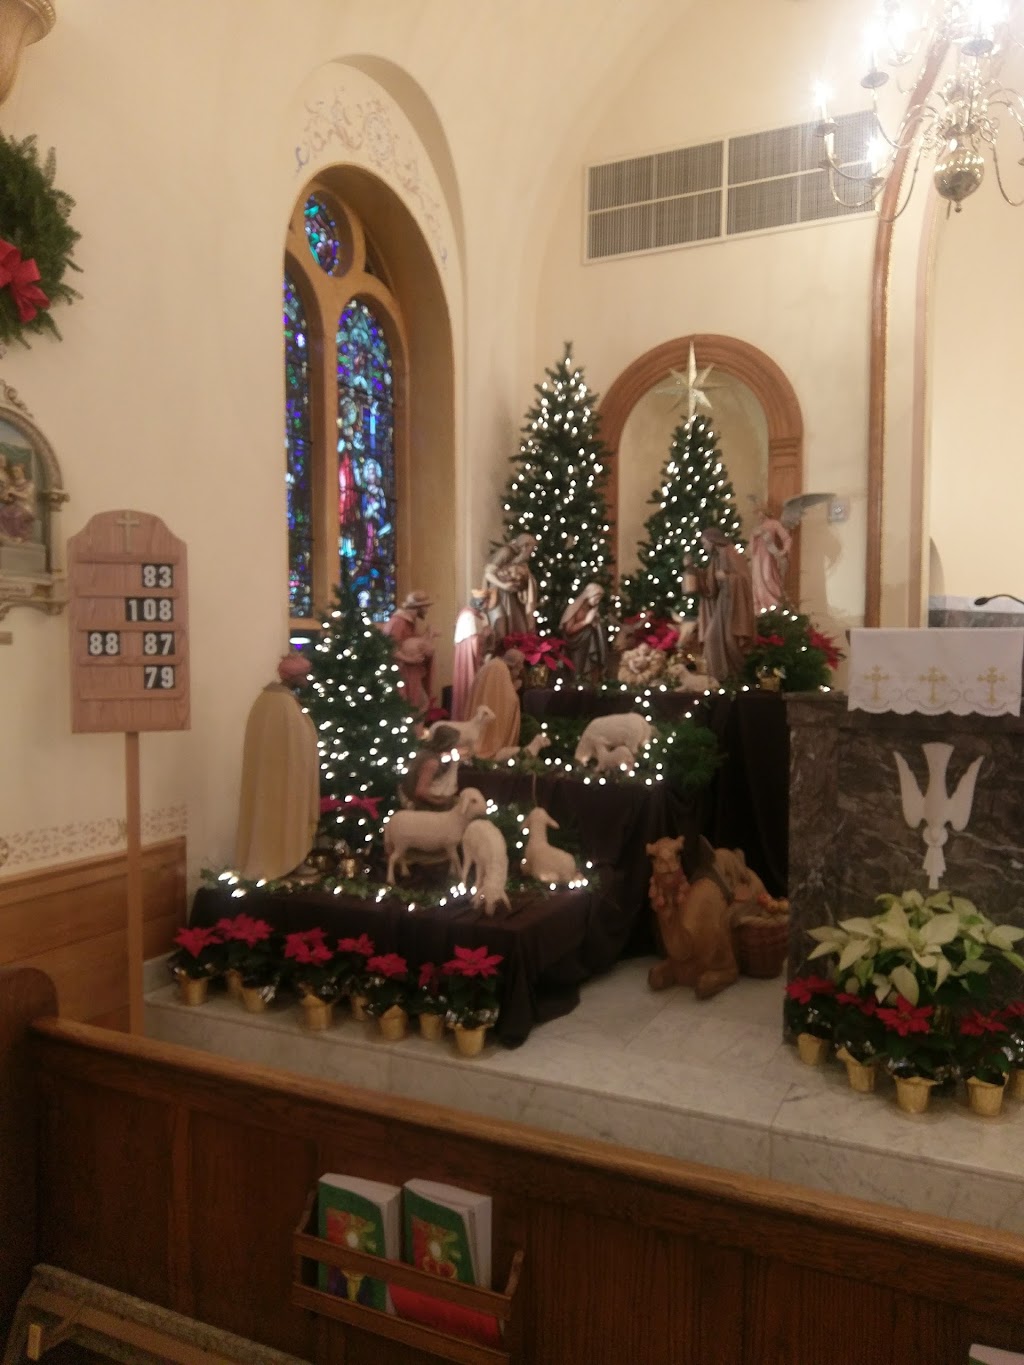 Our Lady of the Assumption Parish | 35 Old Eagle School Rd, Wayne, PA 19087 | Phone: (610) 688-1178